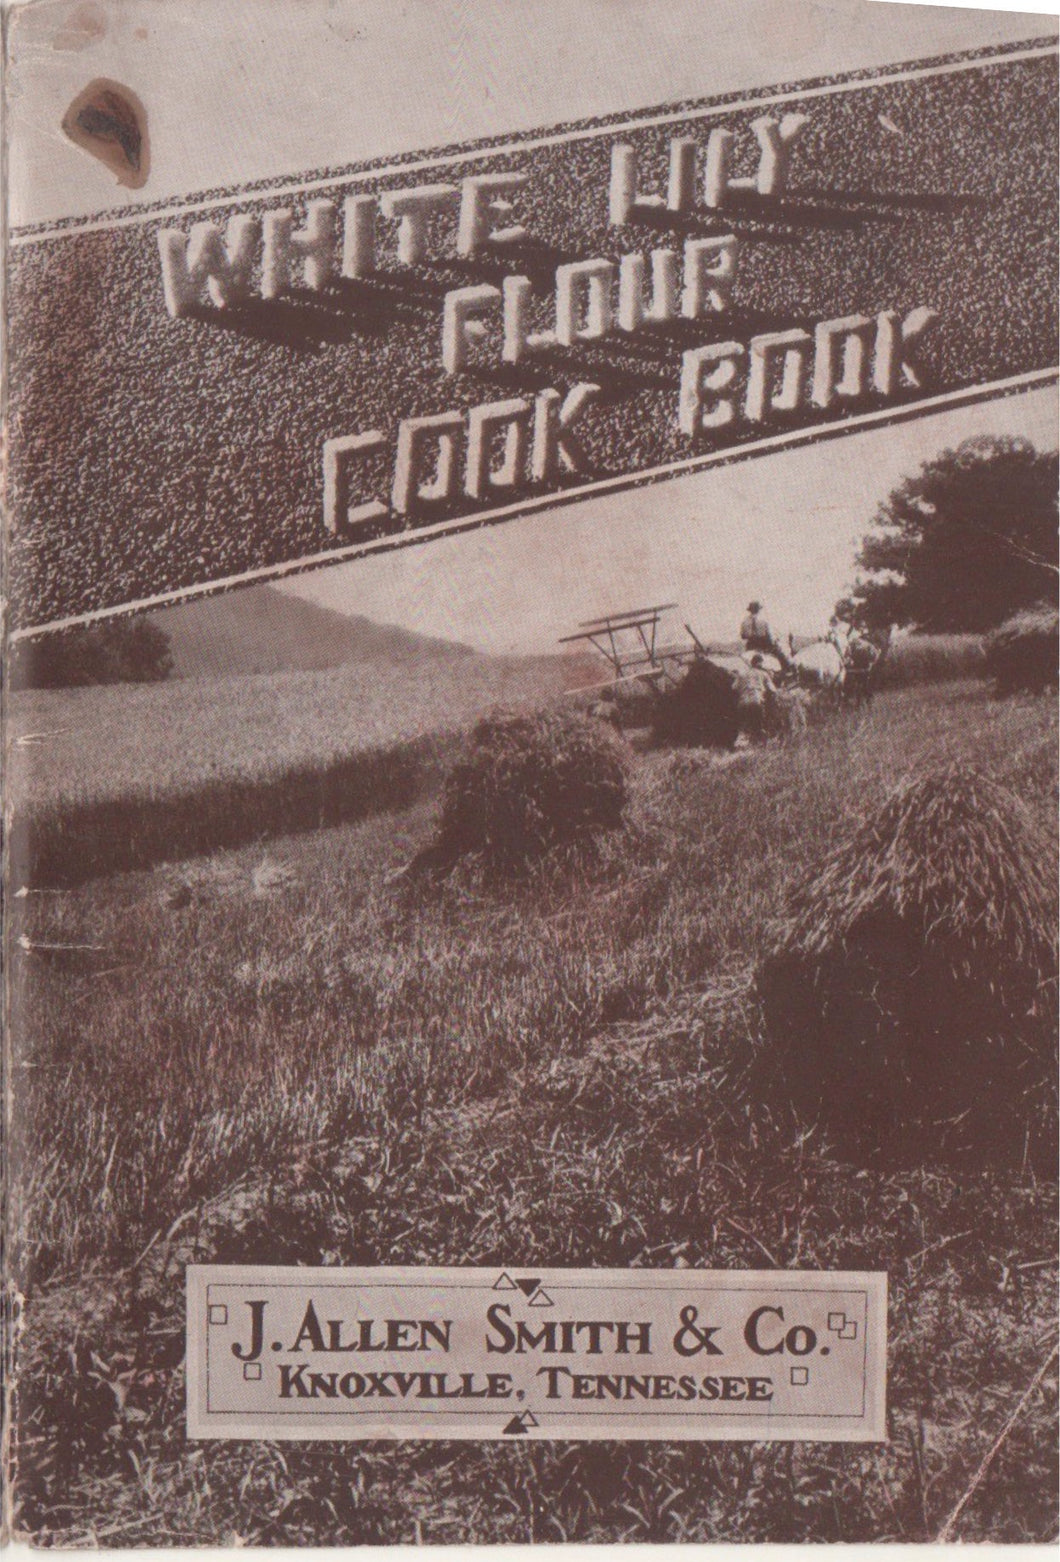 White Lily Flour Cook Book (1932)